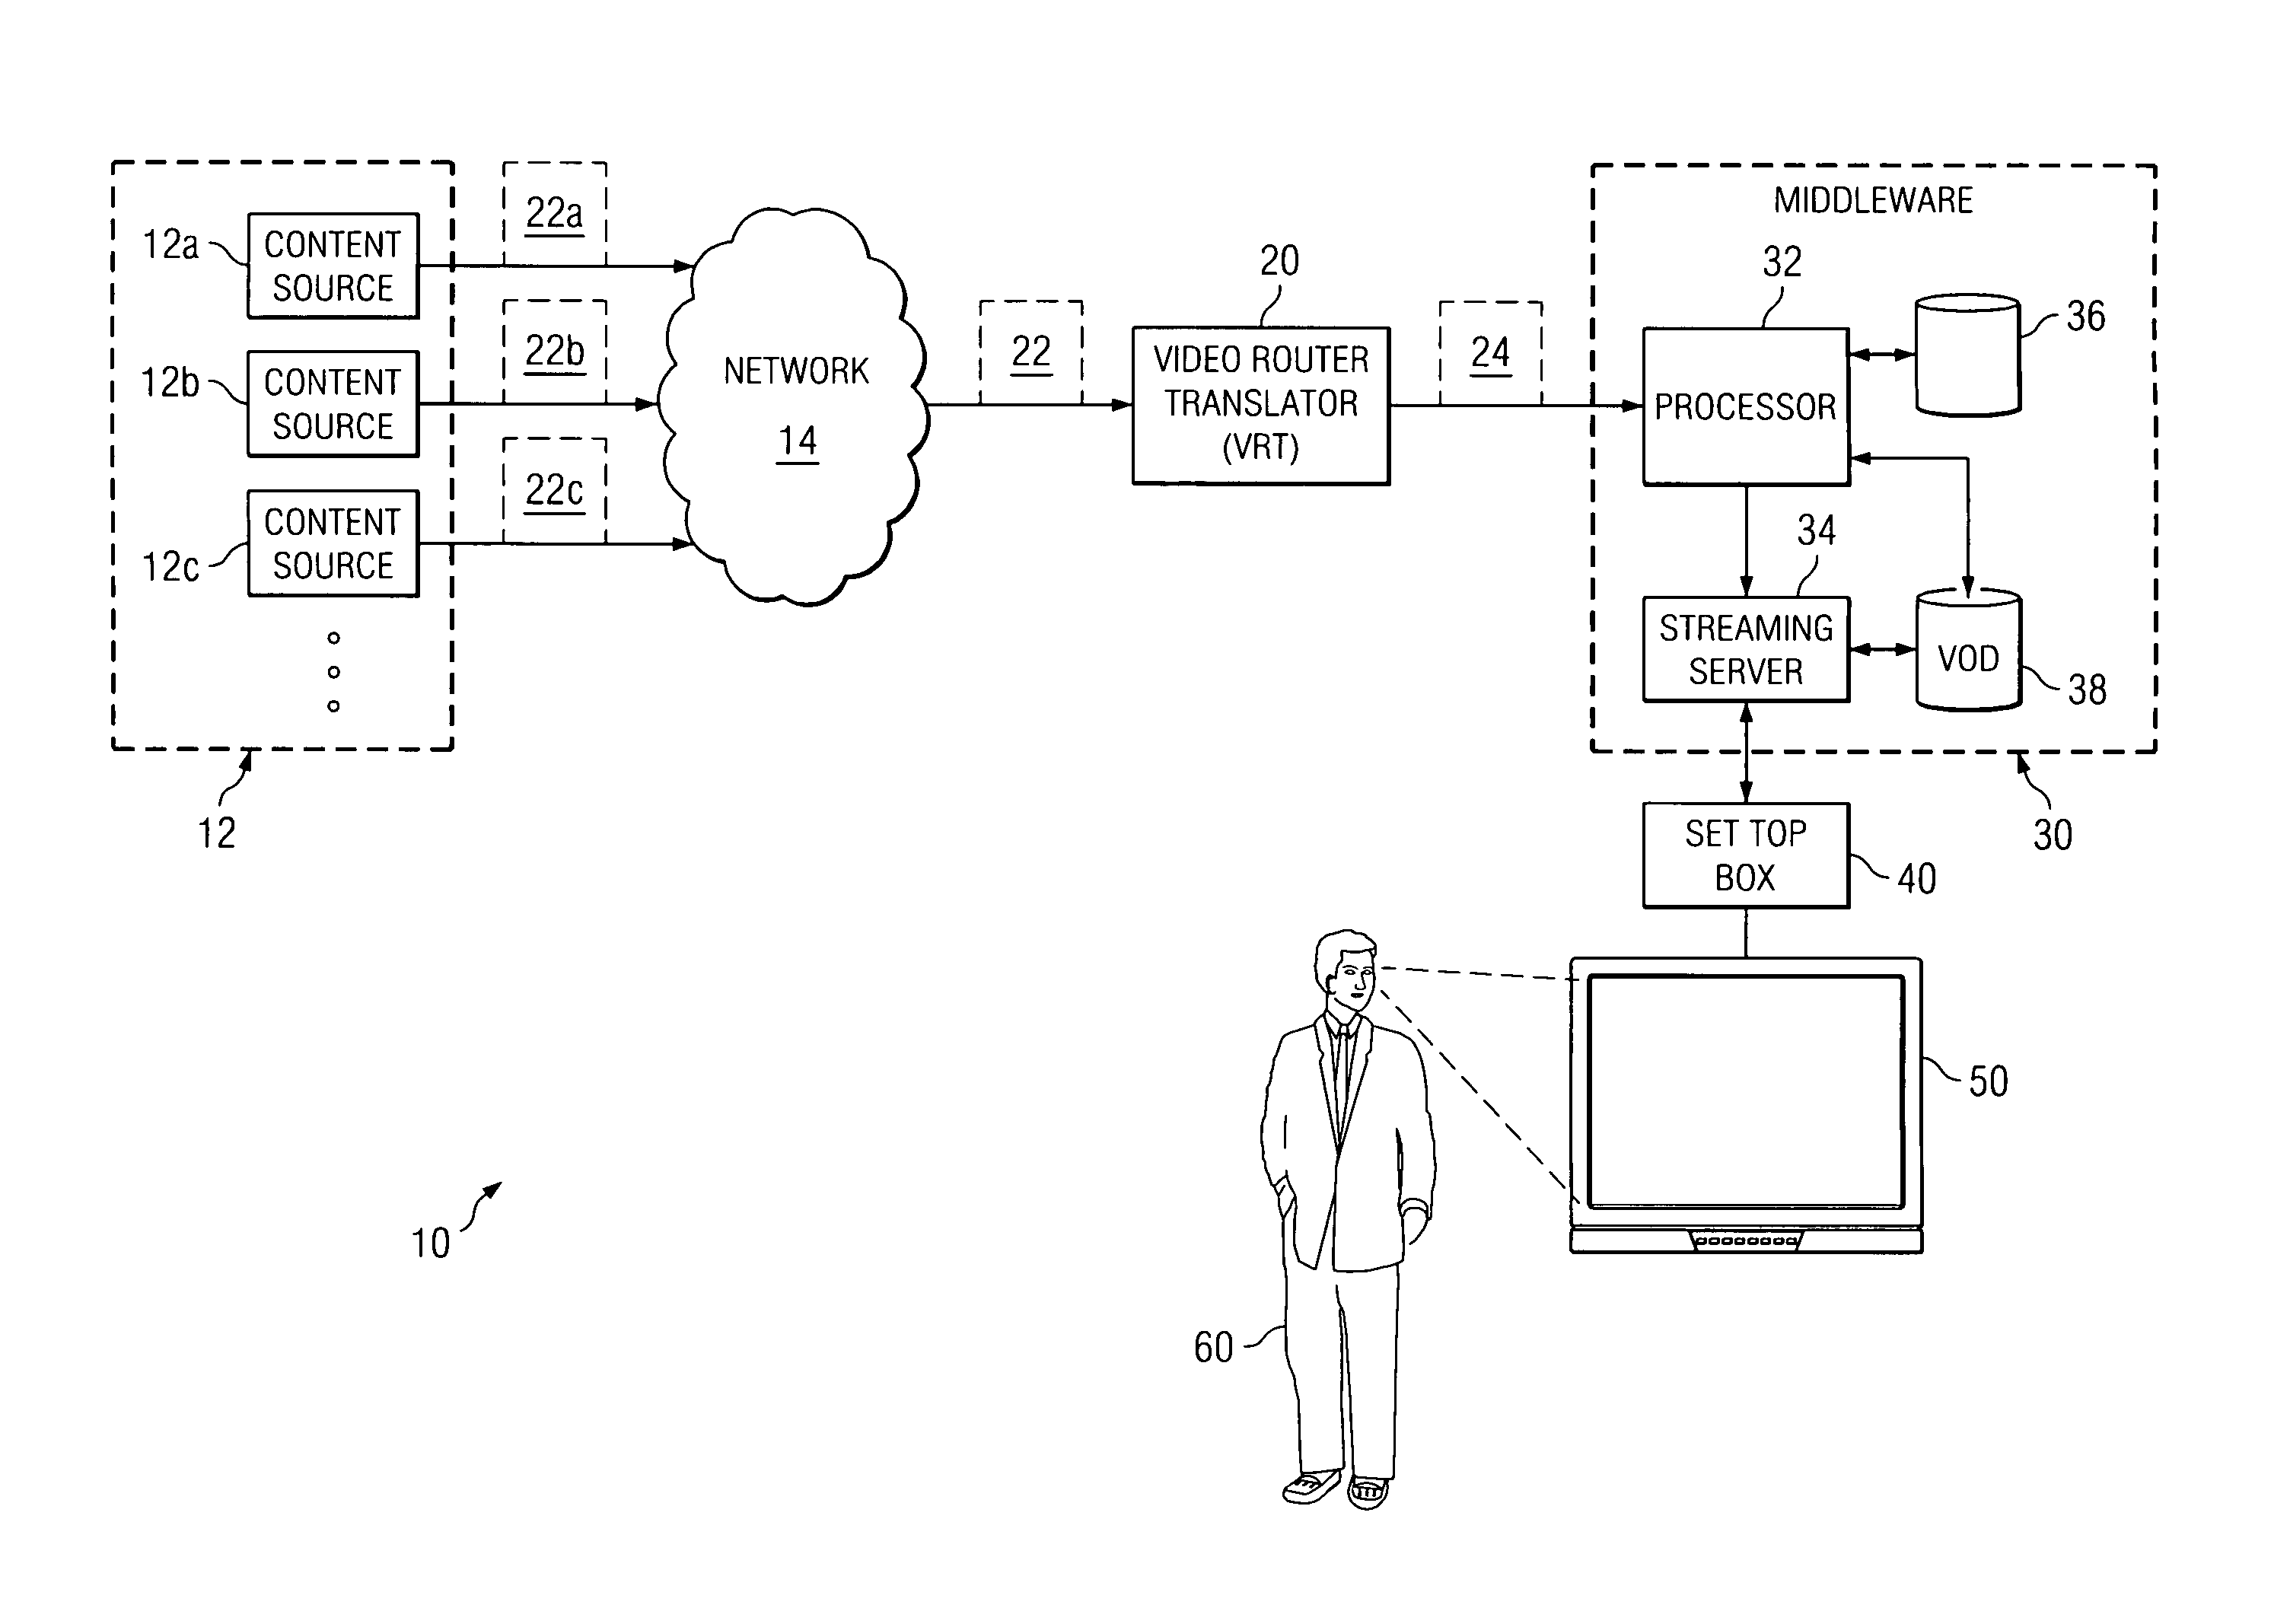 System and method for routing content